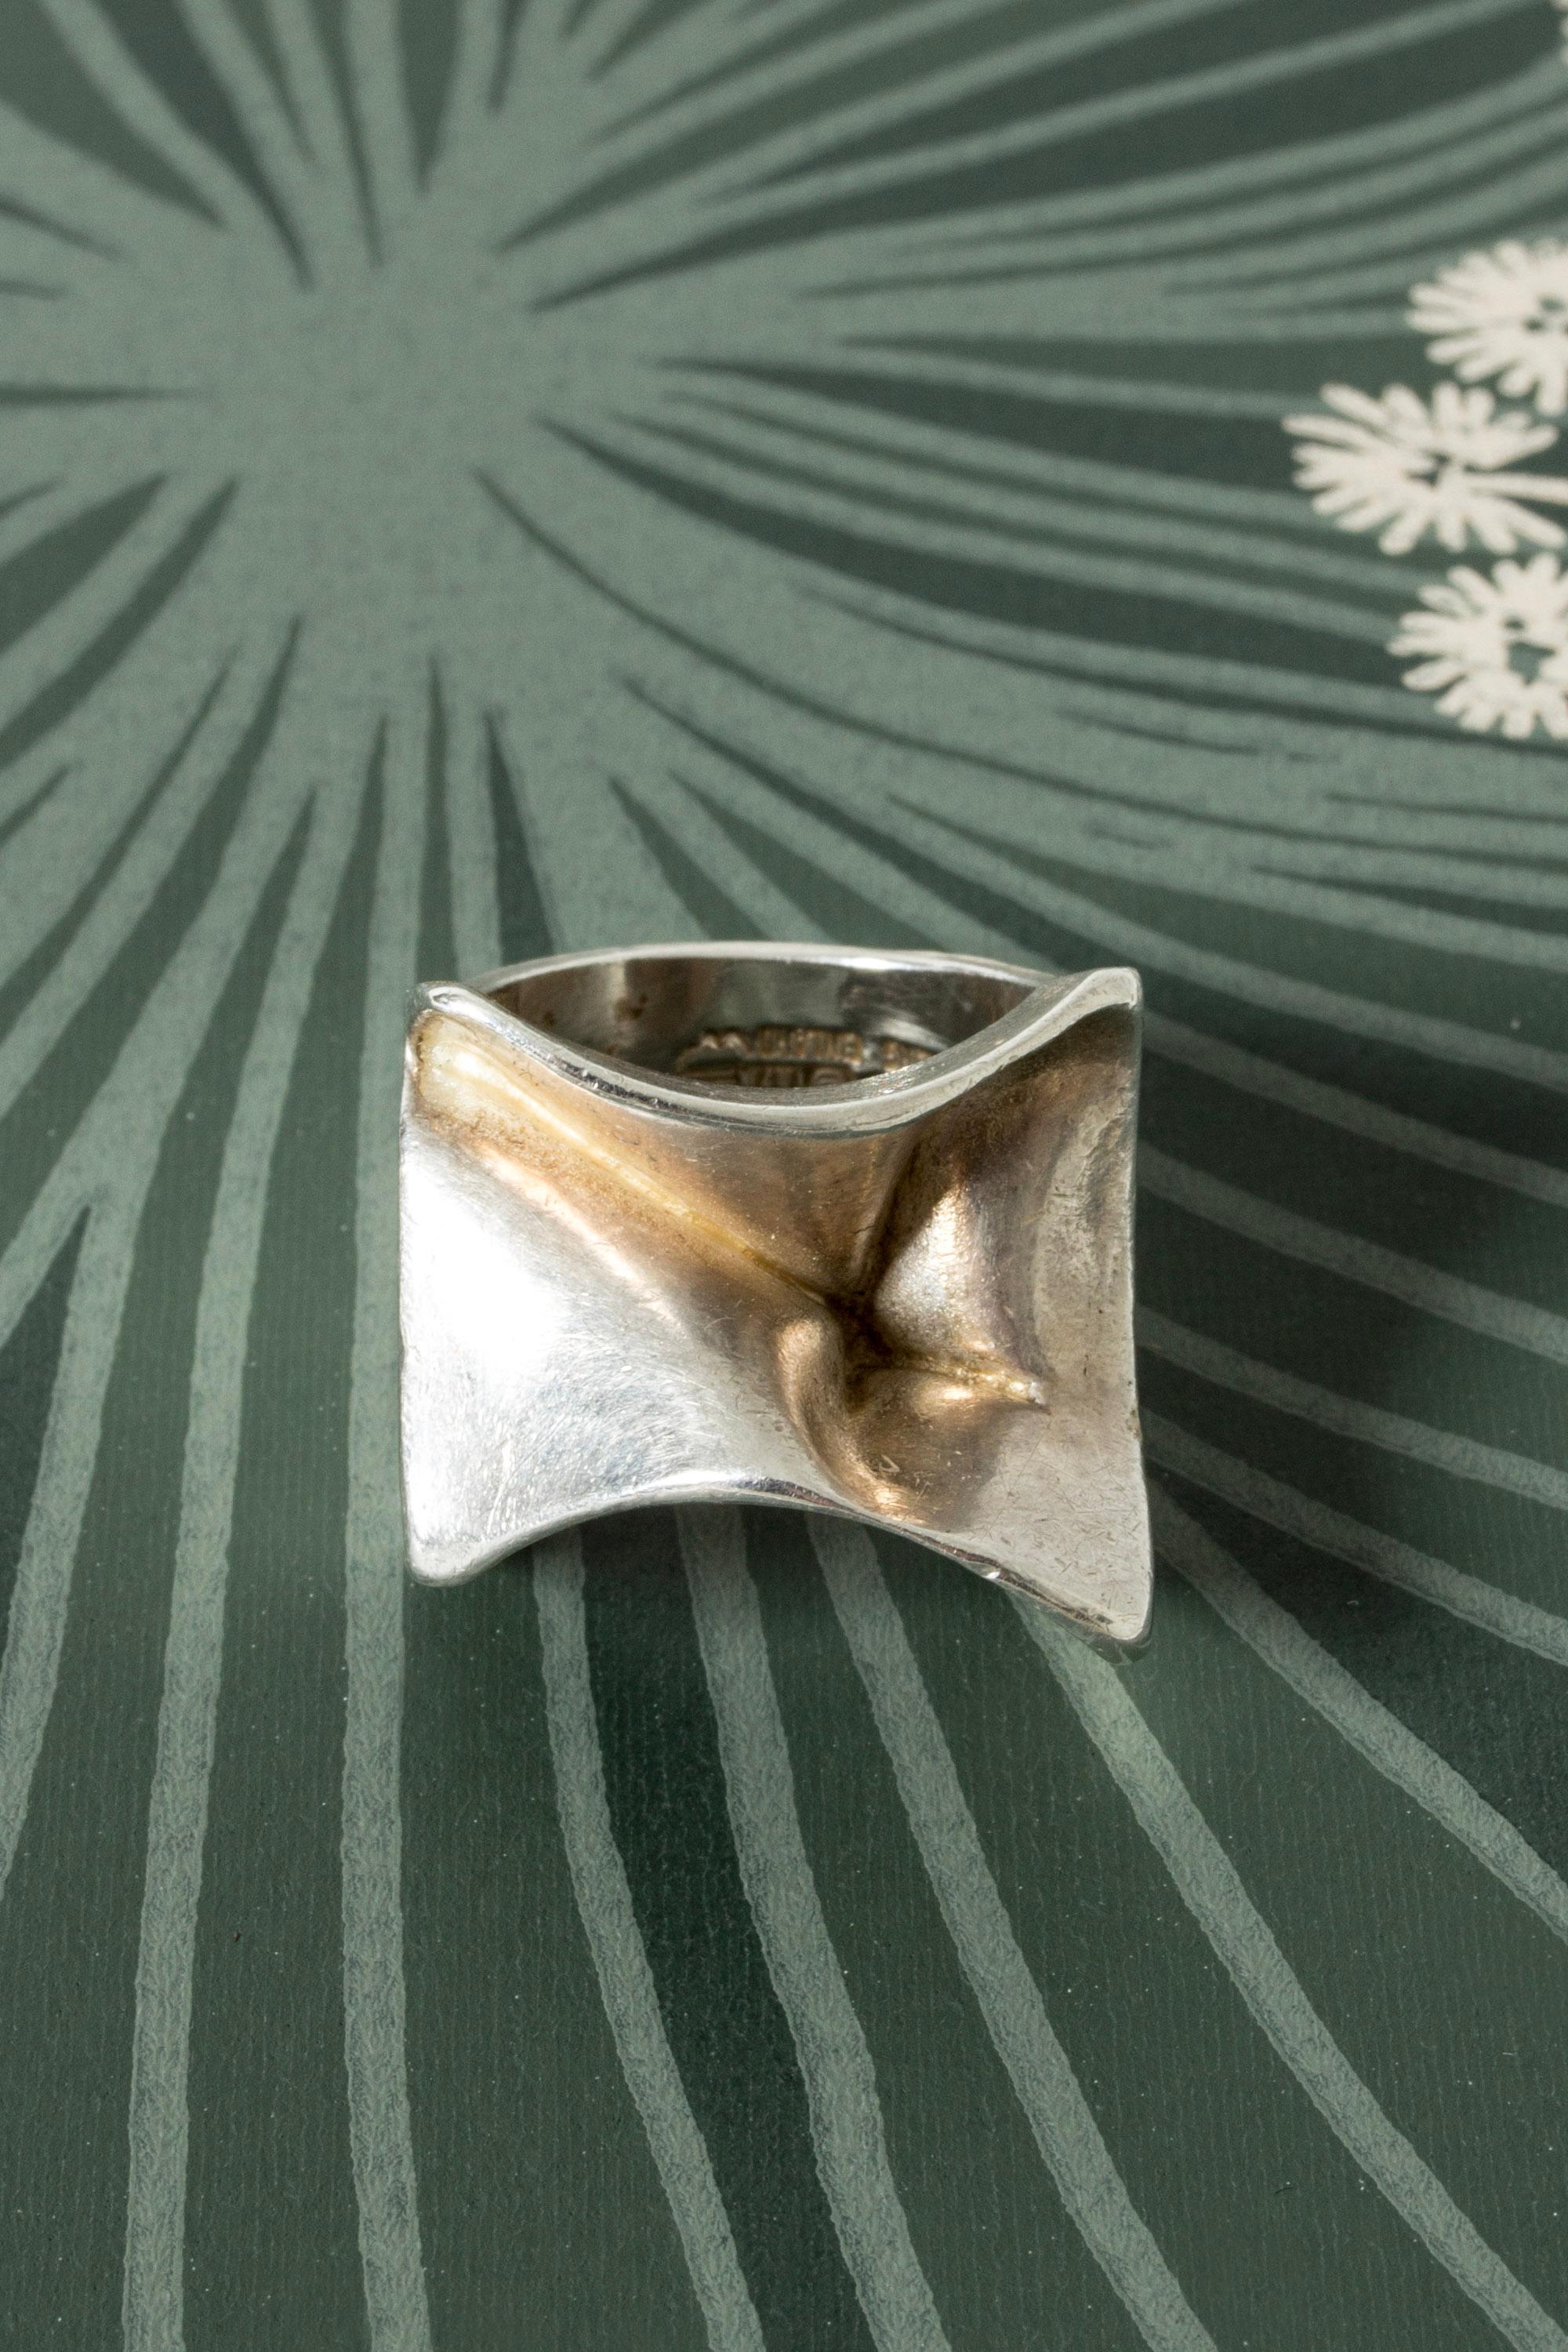 Striking silver ring by Björn Weckström, model called “Carina”. Generous silver folds, looks and feels great on the finger.